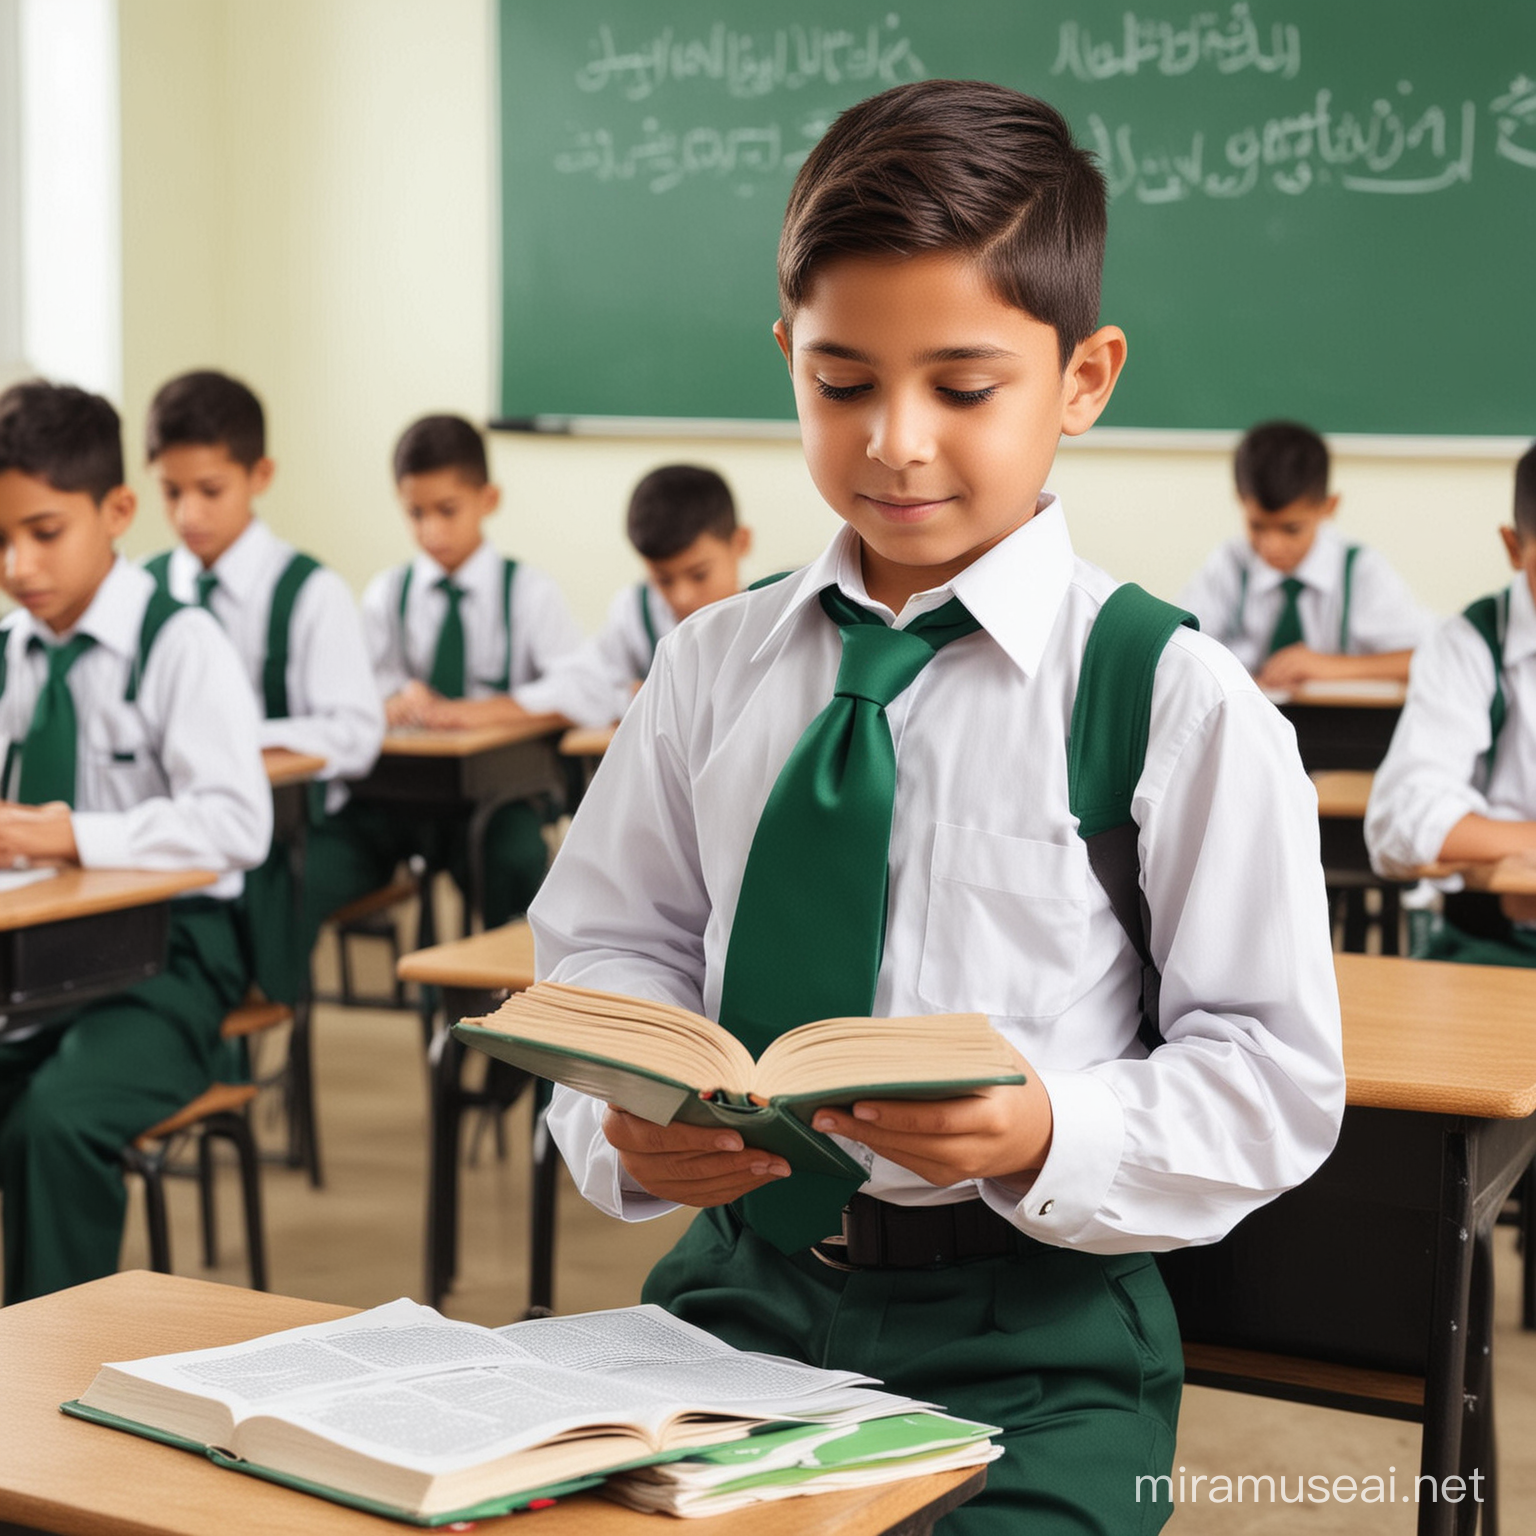 Create an image of small student in uniform having book in his hand and sitting in the classroom, there should a text in the side asking to give Zakat to support orphans. Shirt colour shouldn't be white, tie green and Pant in Black  